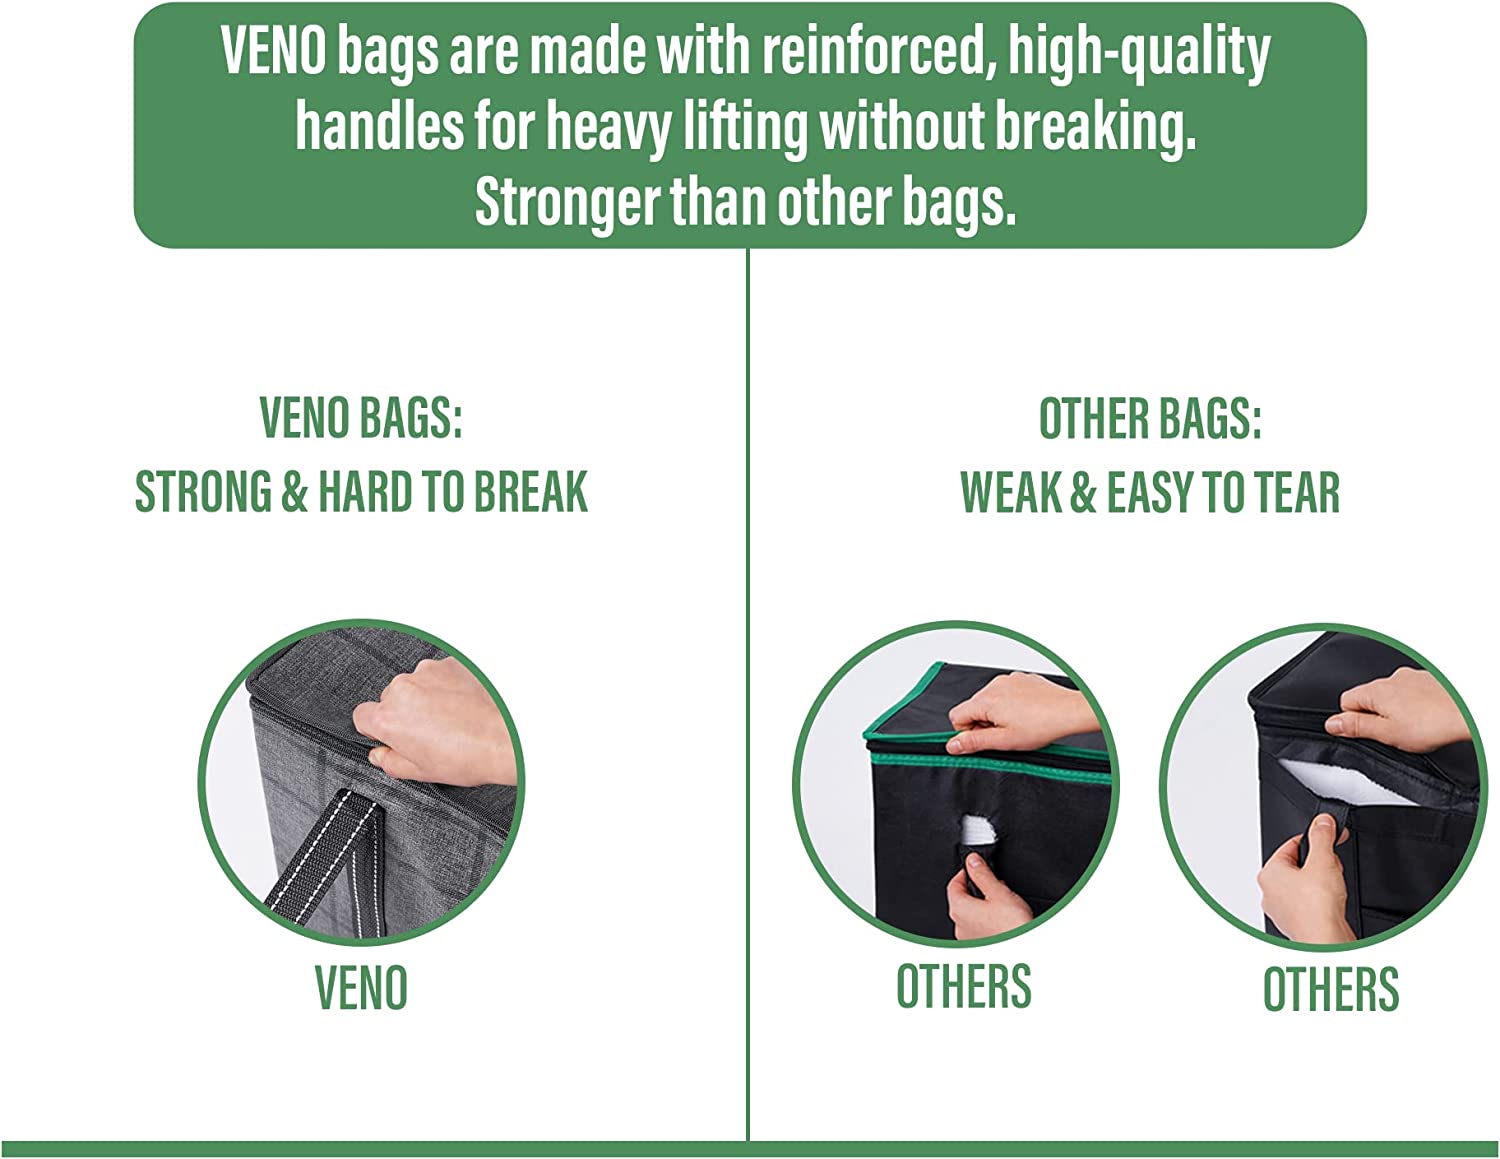 Insulated Reusable Grocery Bag by VENO, Durable, Heavy Duty, Extra Large Size, Stands Upright, Collapsible, Sturdy Zipper, Made by Recycled Material, Eco-Friendly - FoxMart™️ - VENO BAG